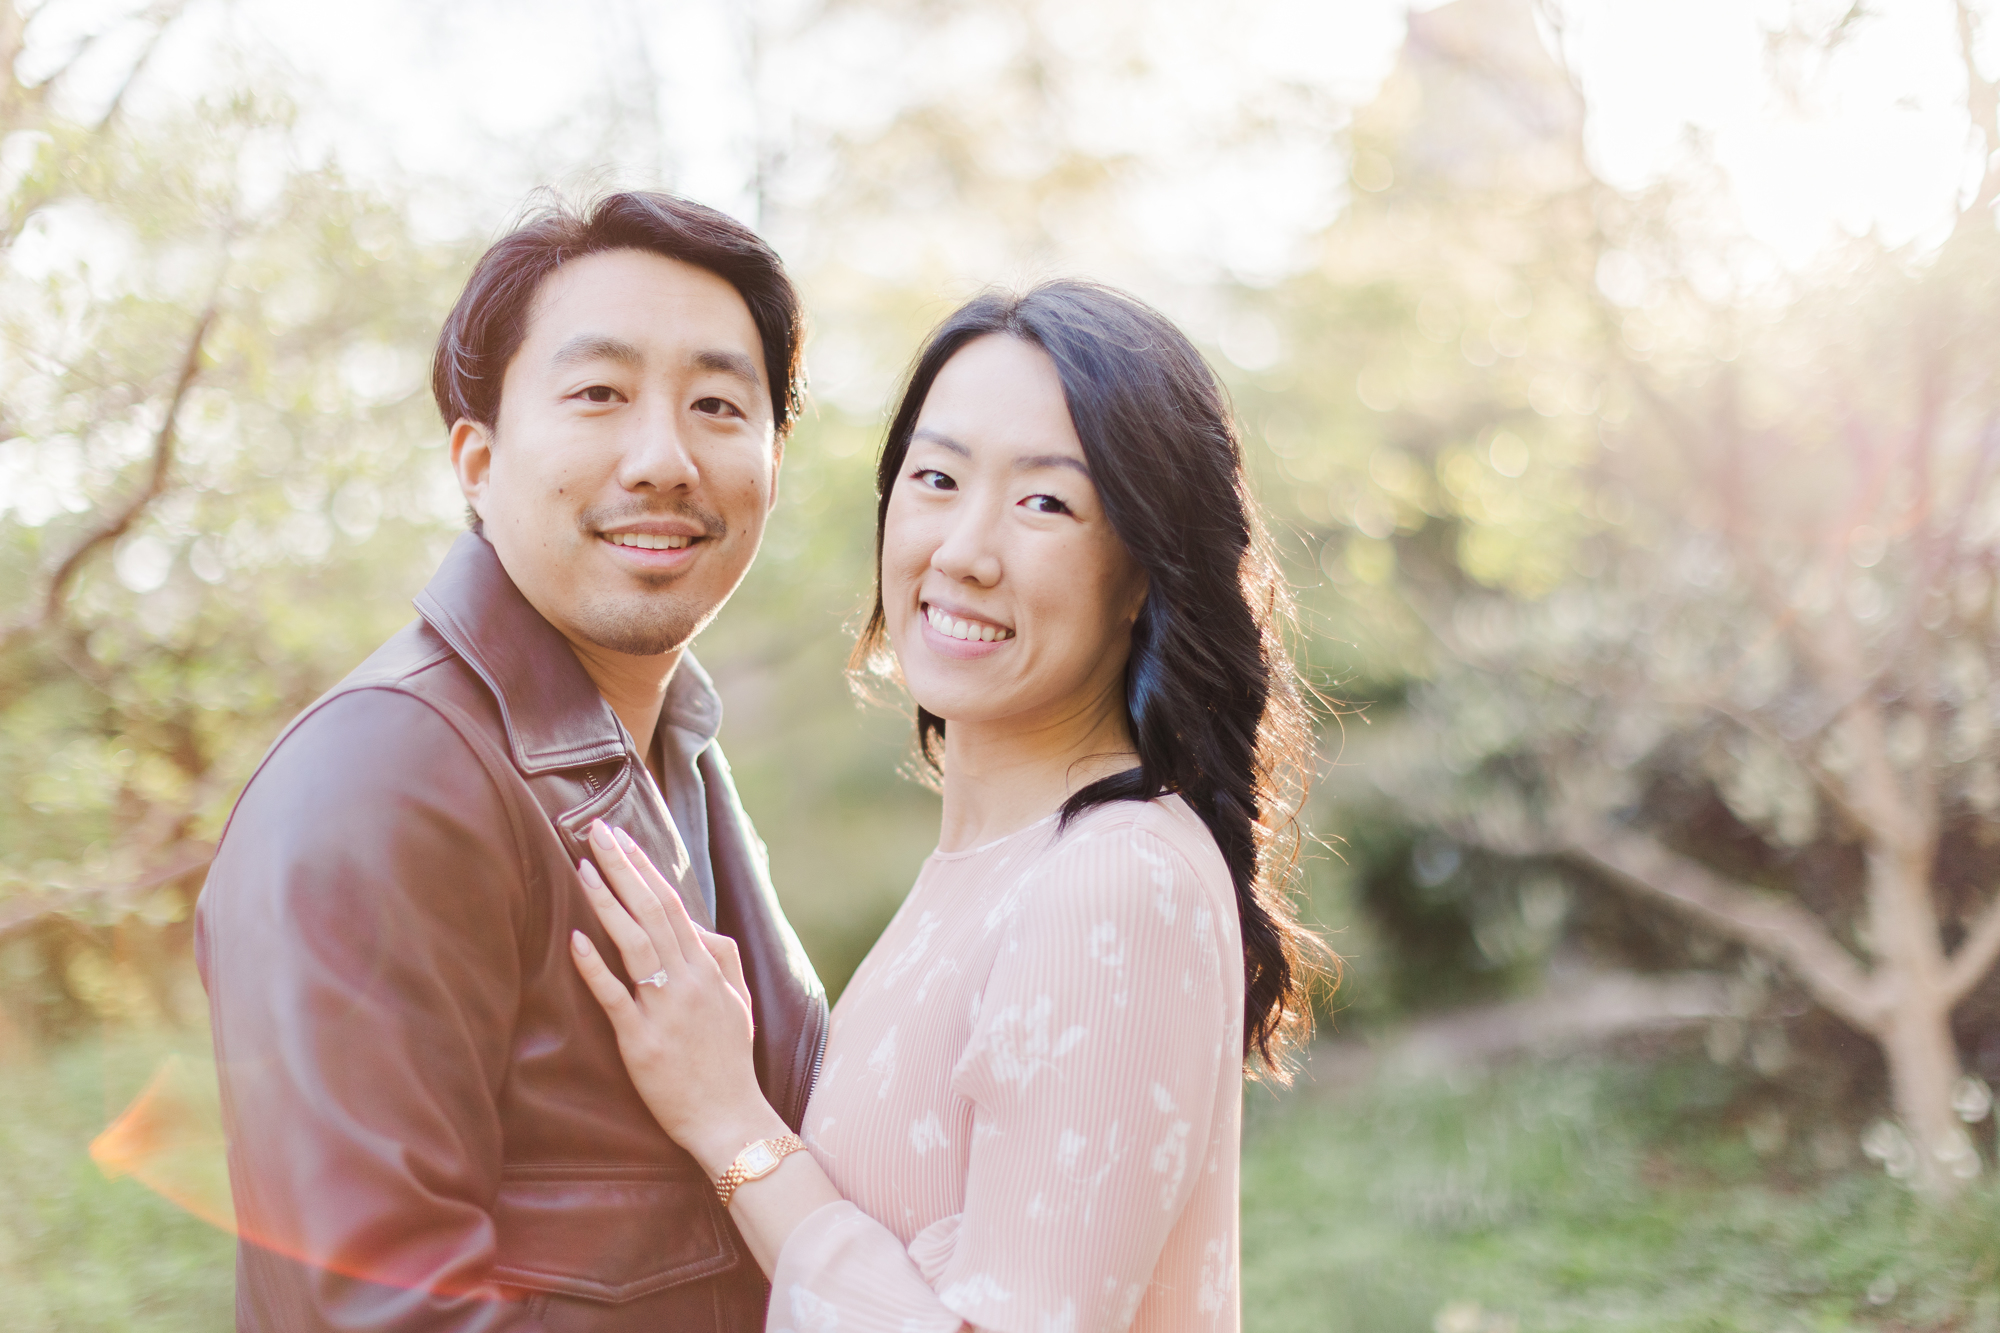 Vibrant Central Park Engagement Photos in the Spring